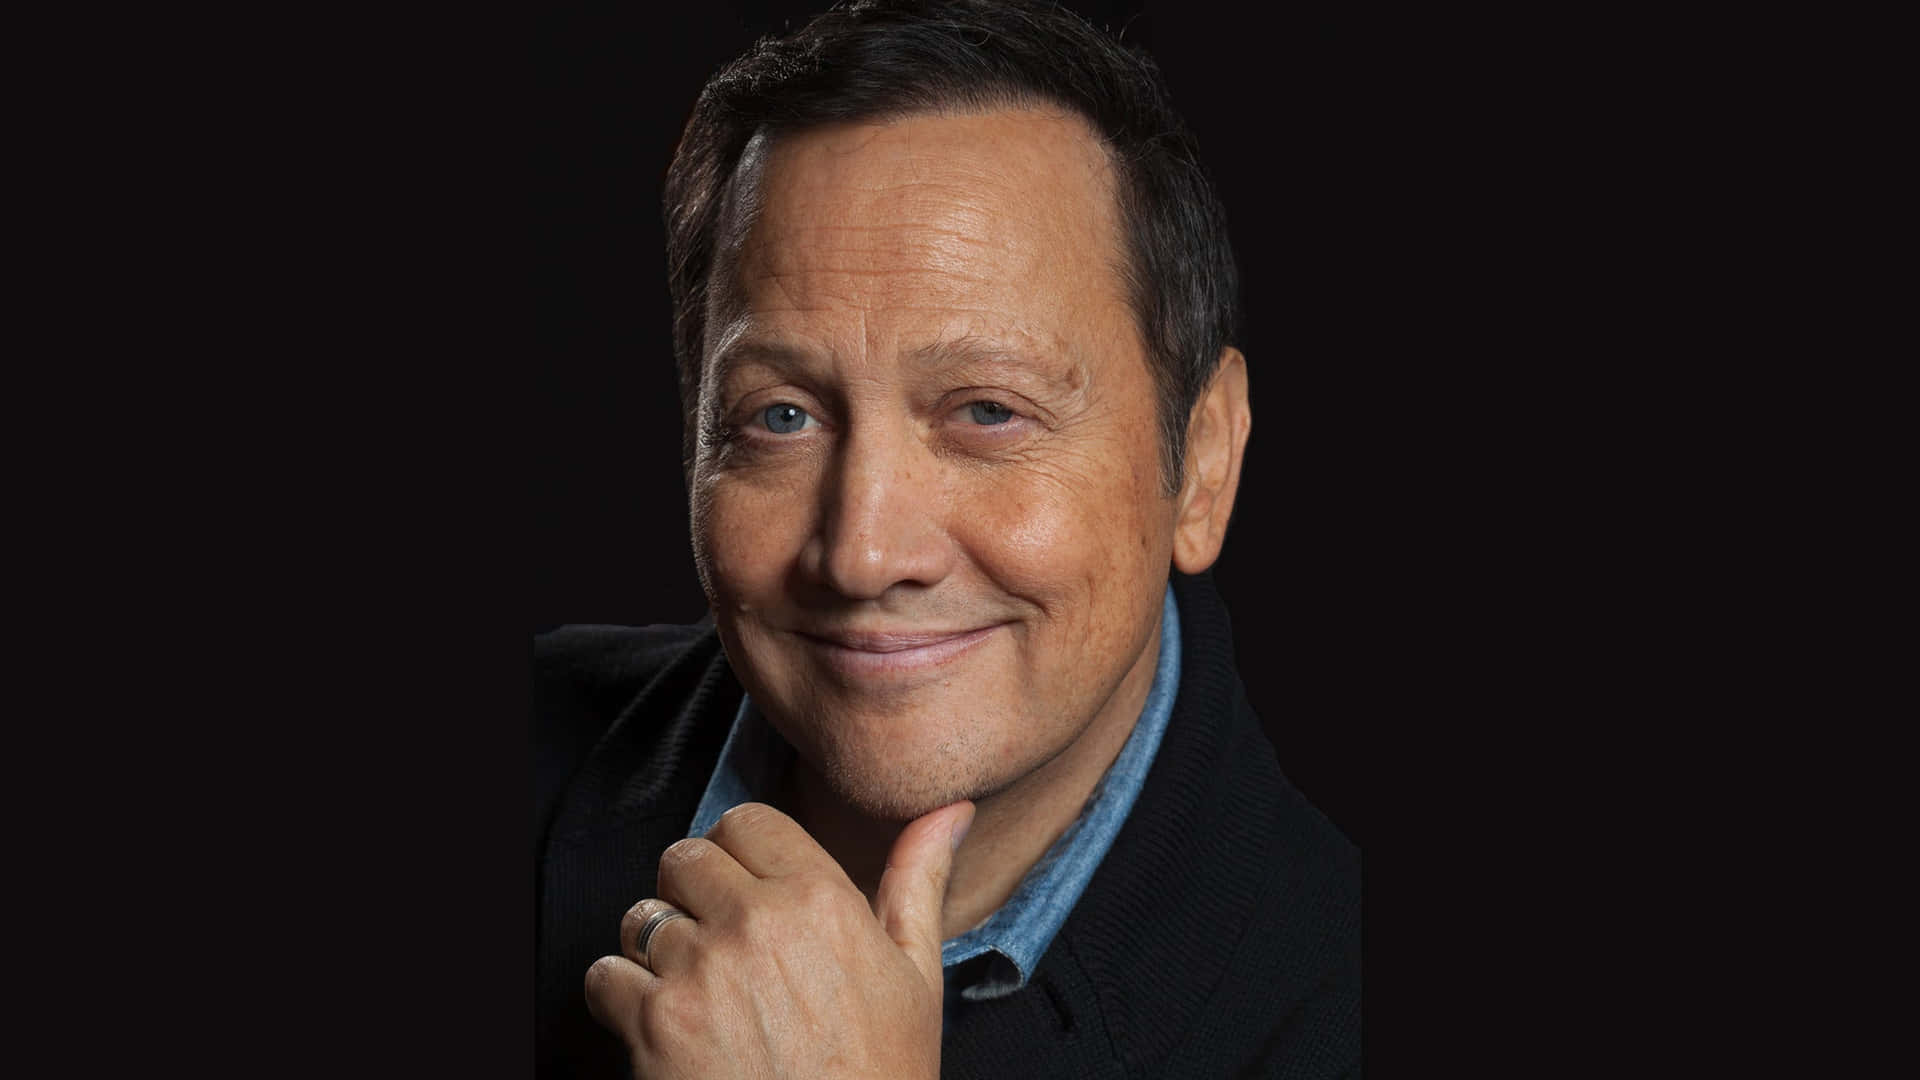 Hollywood Actor Rob Schneider In A Candid Shot Wallpaper